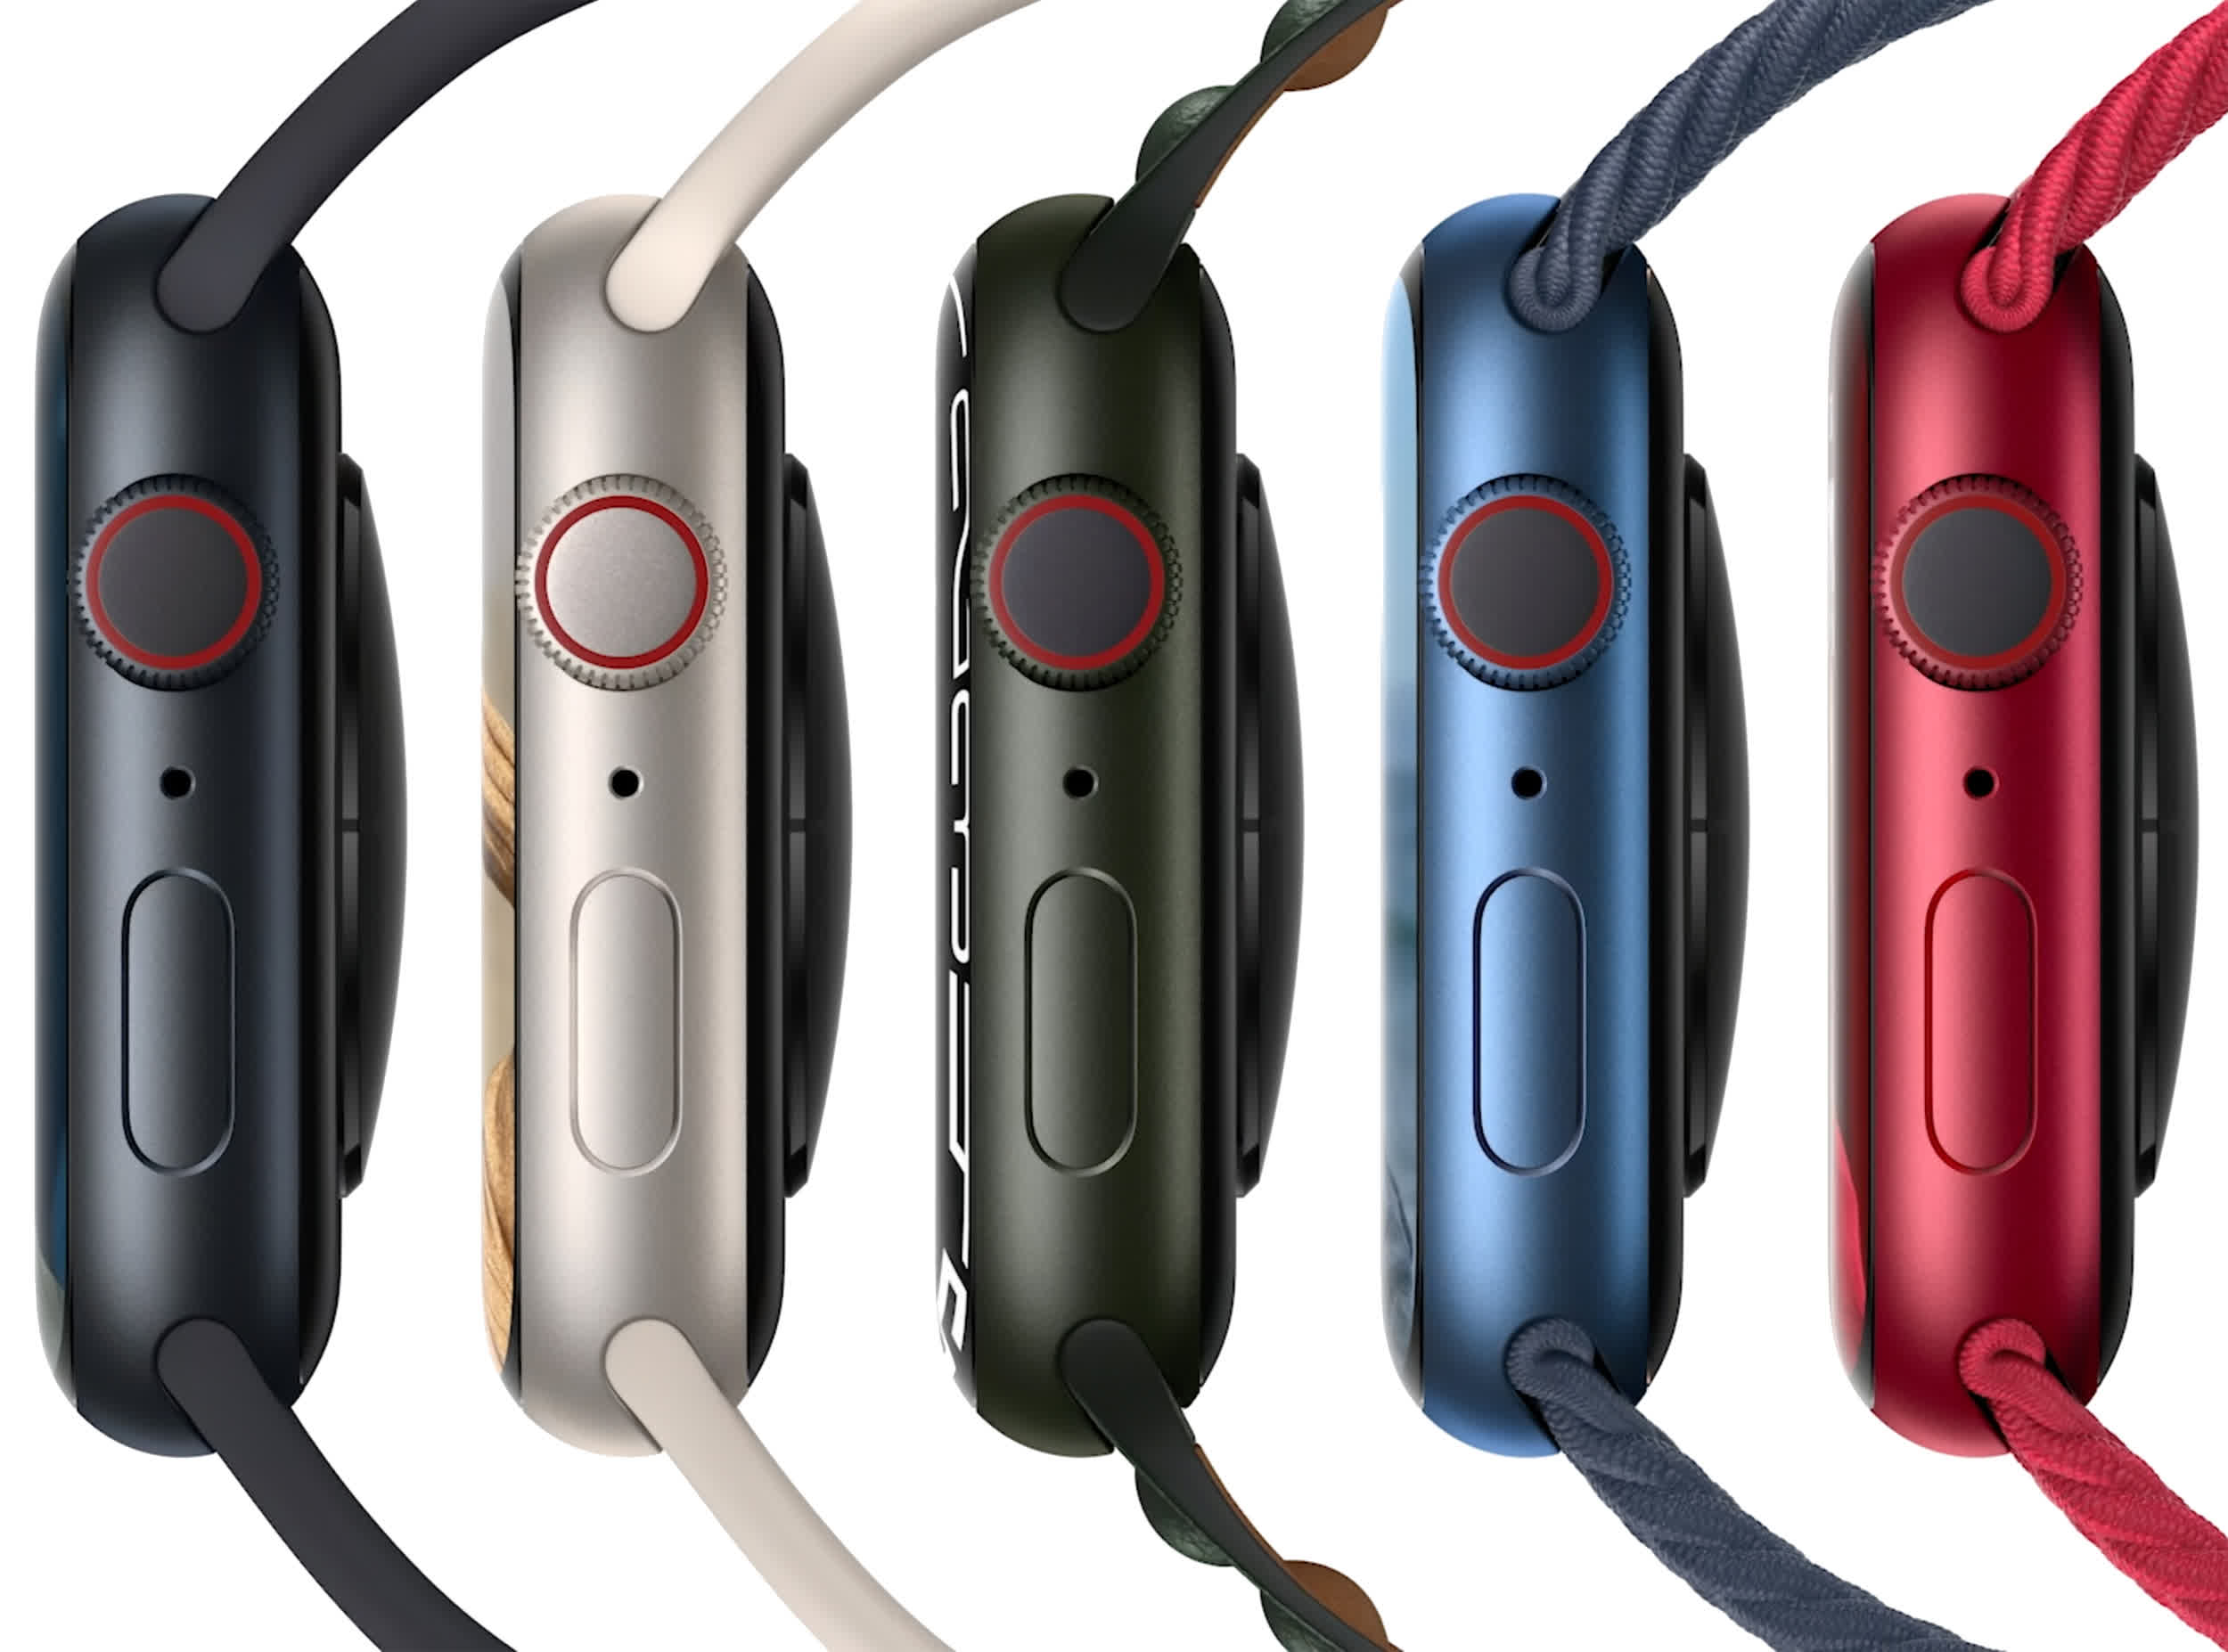 Rugged Apple Watch Series 8 Pro may require new bands